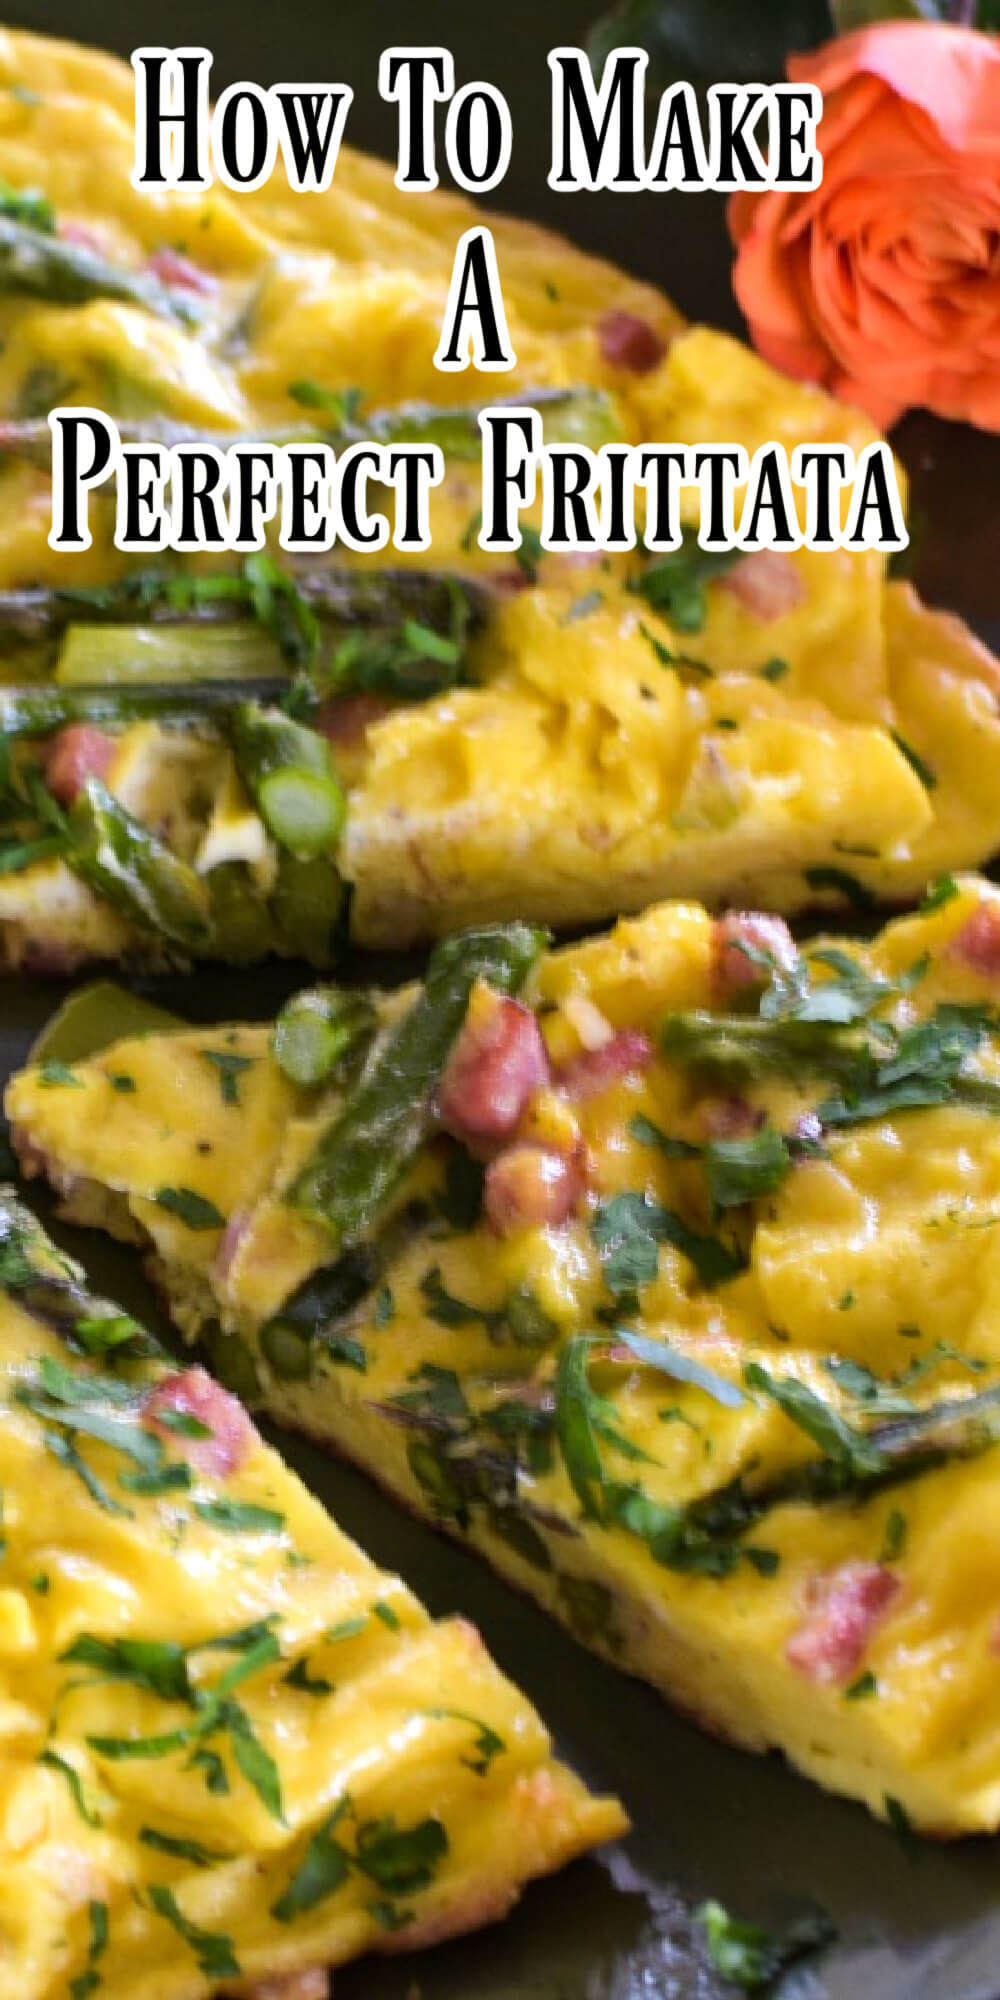 A well made frittata is one of the most perfect foods you’ll ever eat. Once you know how to make one – you’ll never go hungry. The formula is the same, change it with the veggies, meats, and cheese you love. The variations are endless. This recipe shows you exactly how to do it.